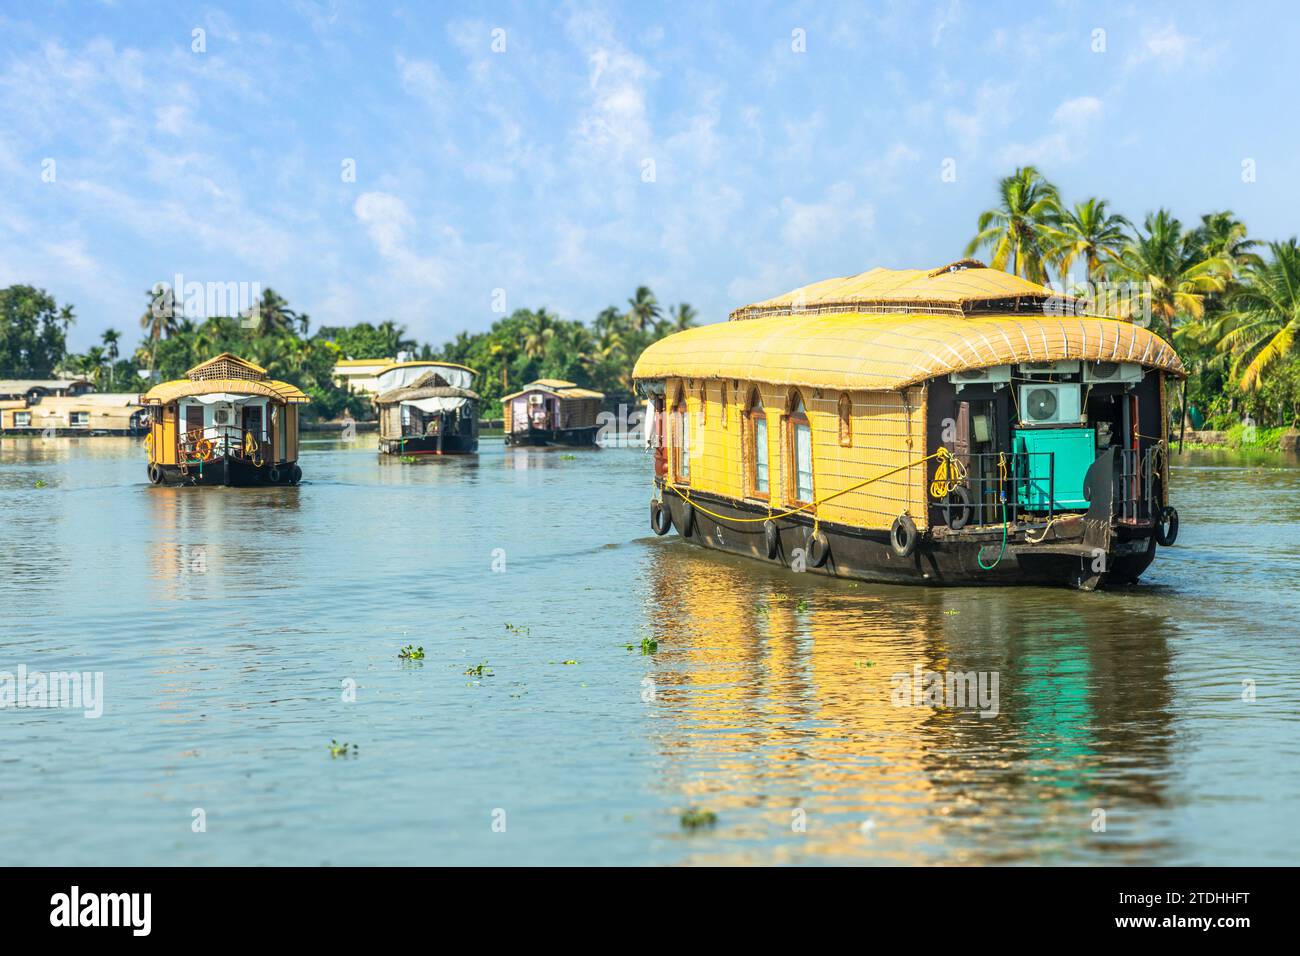 Indian traditional houseboats floating on Pamba river, with palms at the coastline, Alappuzha, Kerala, South India Stock Photo